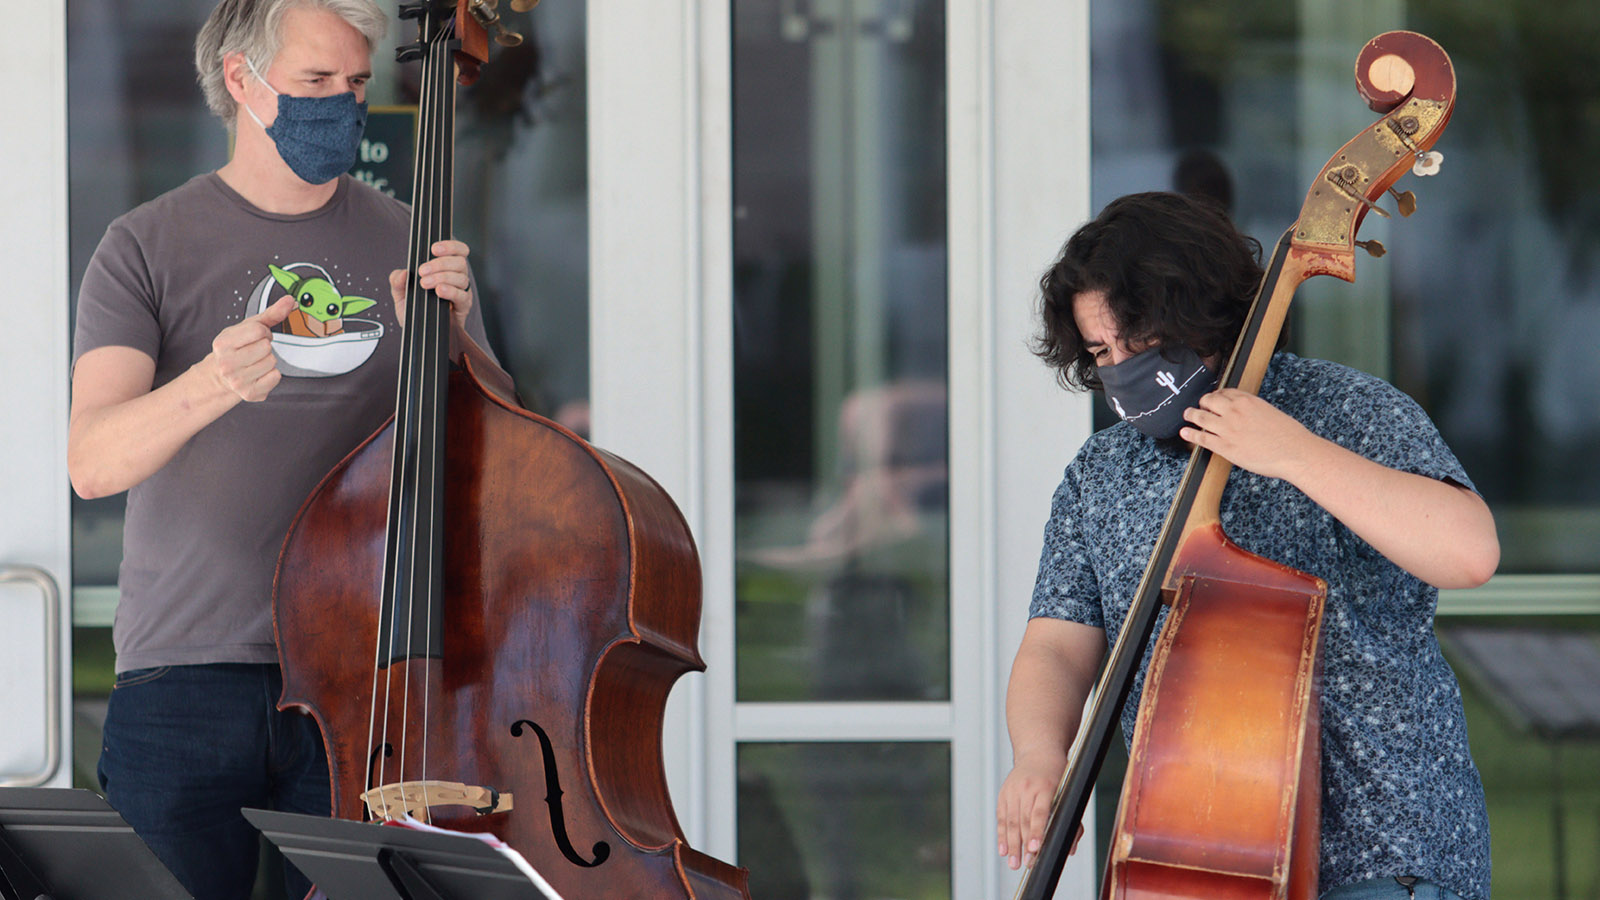 Mark Urness, Associate Professor of Music, works with Jando Valdez ’24 during the Double Bass Studio class